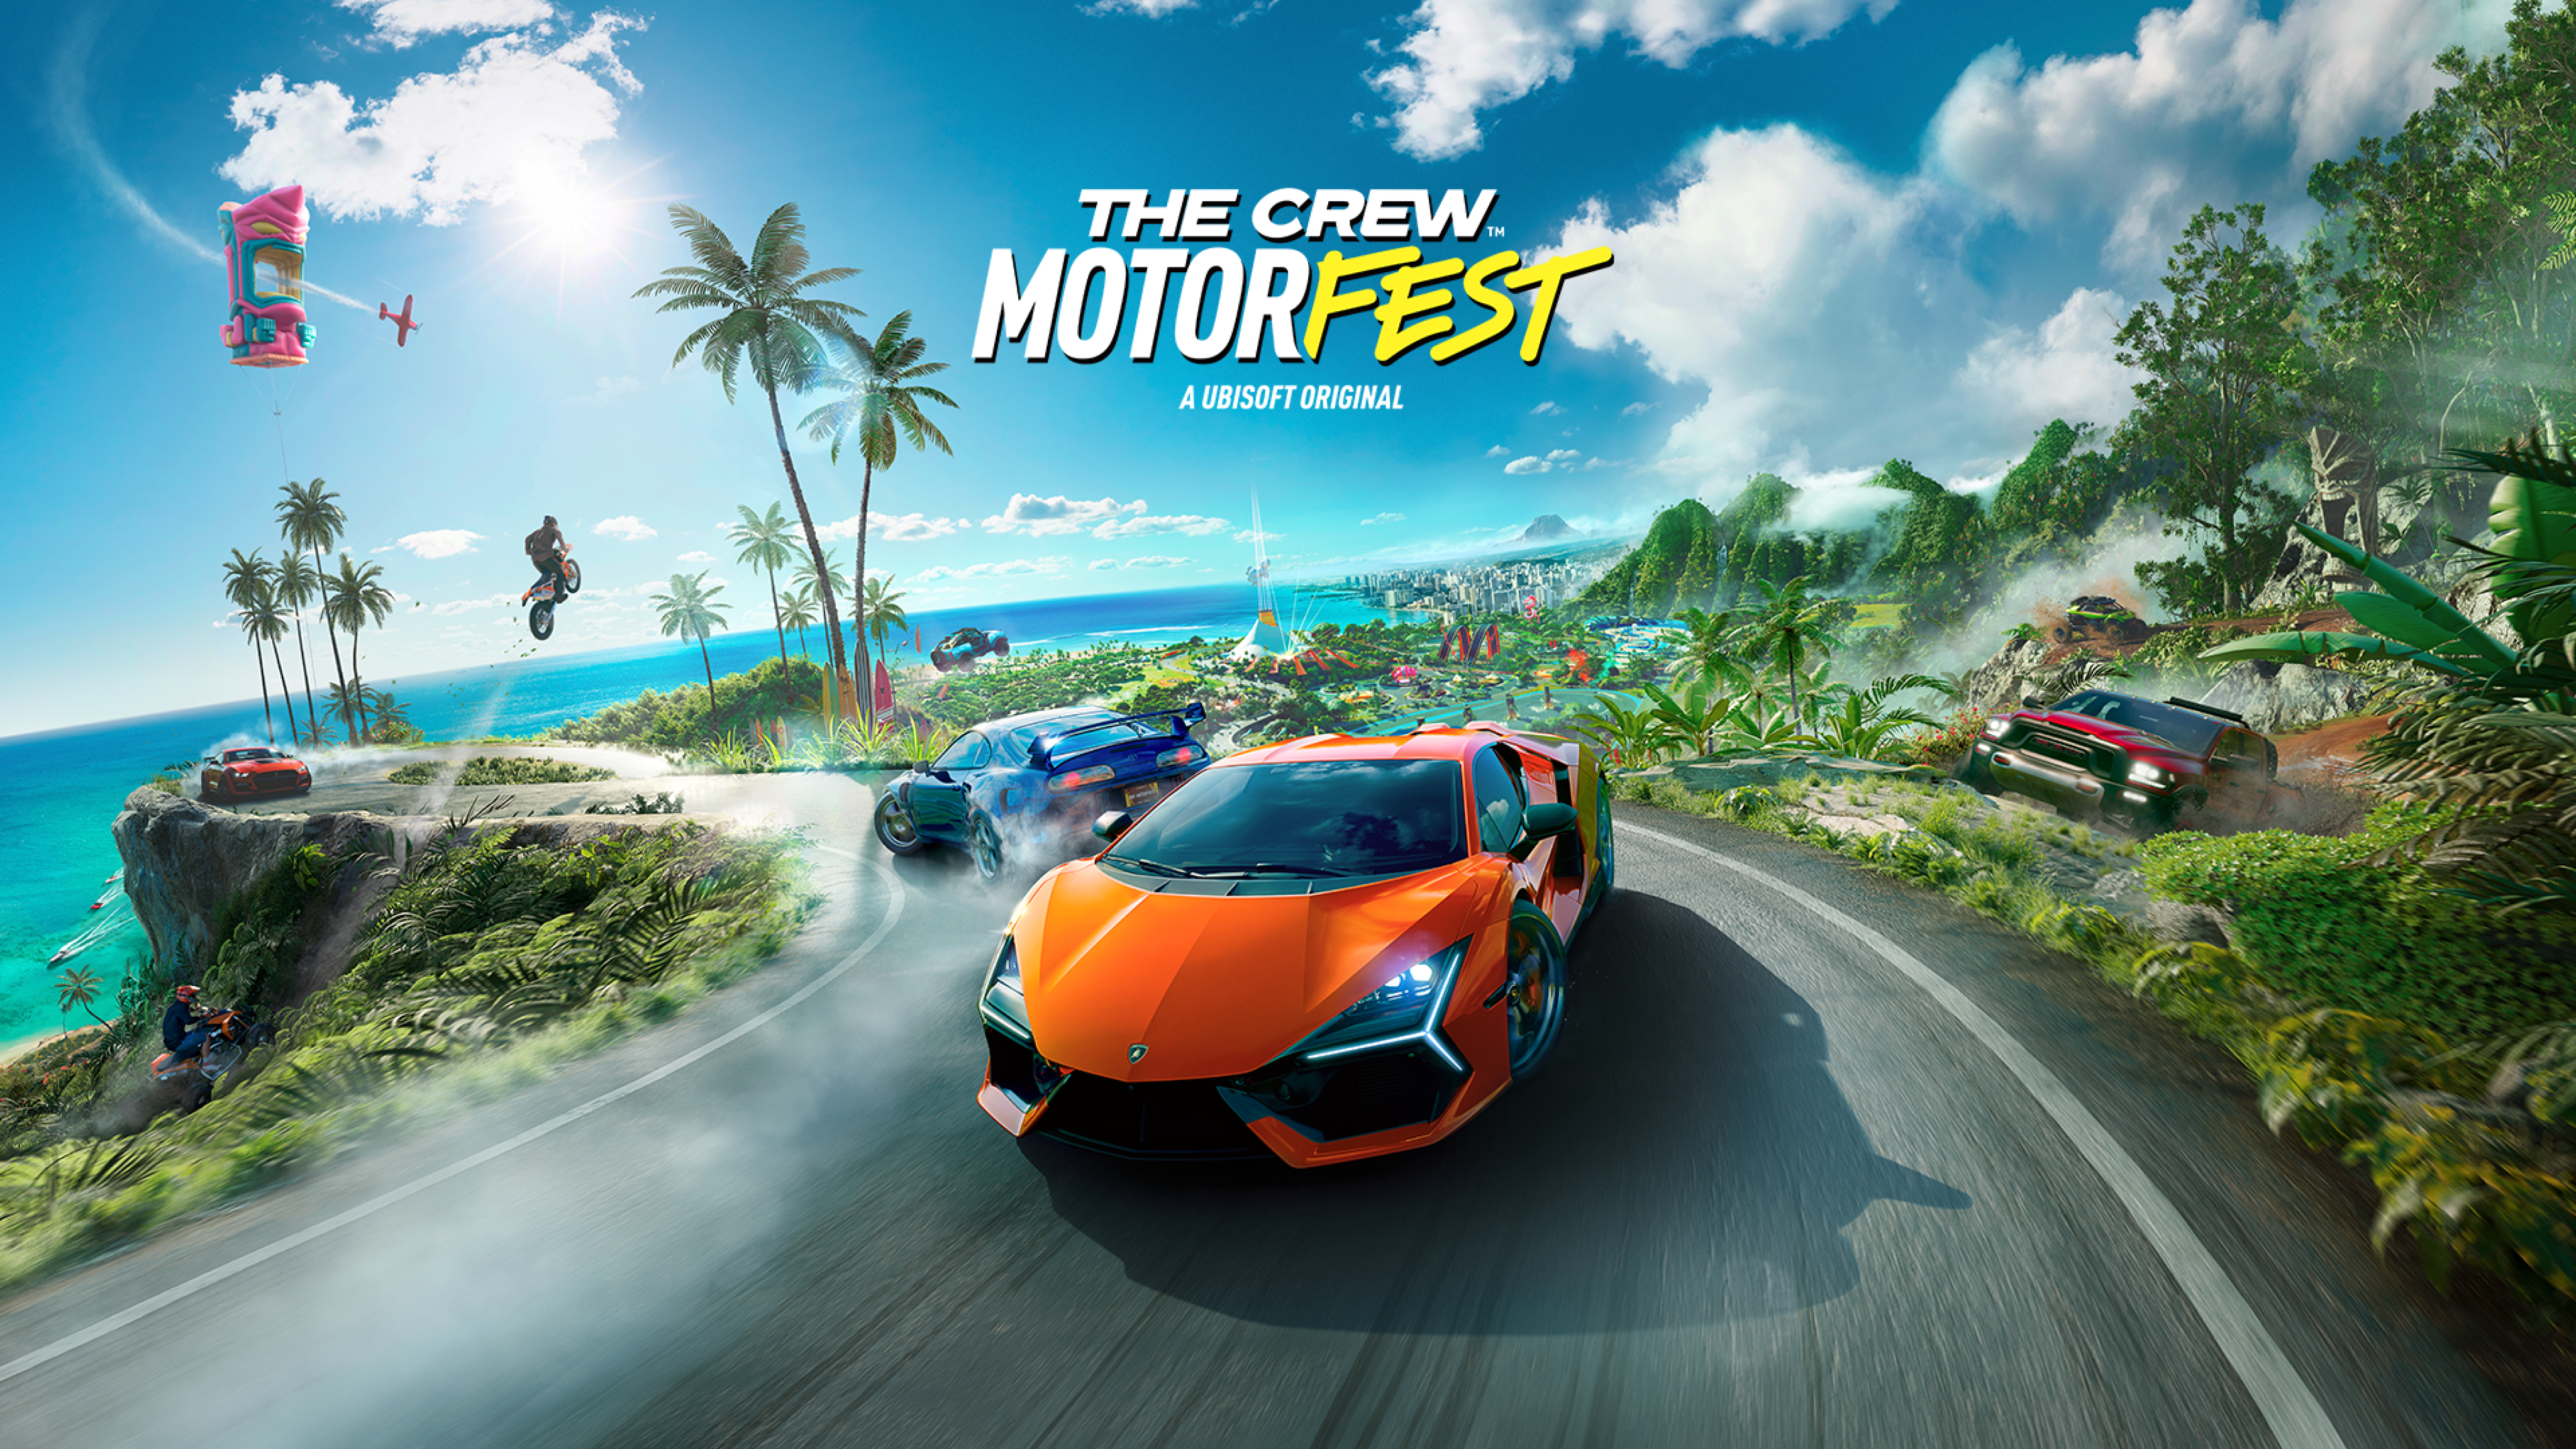 GIVEAWAY: The Crew Motorfest on PlayStation and XBox – 8 copies to